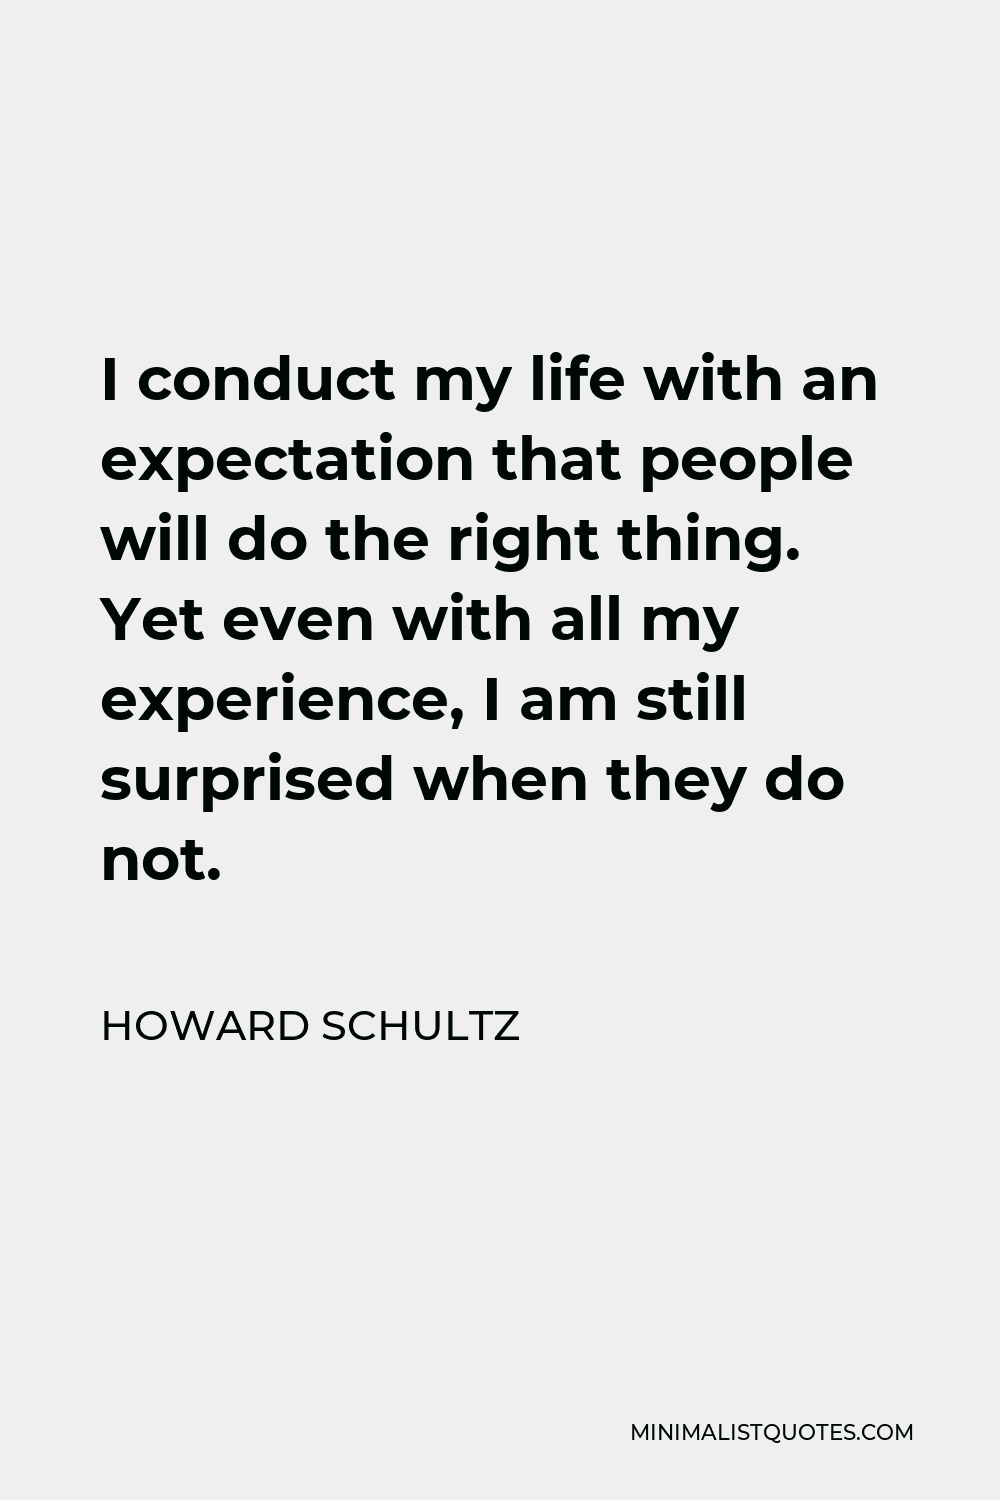 Howard Schultz Quote - I conduct my life with an expectation that people will do the right thing. Yet even with all my experience, I am still surprised when they do not.